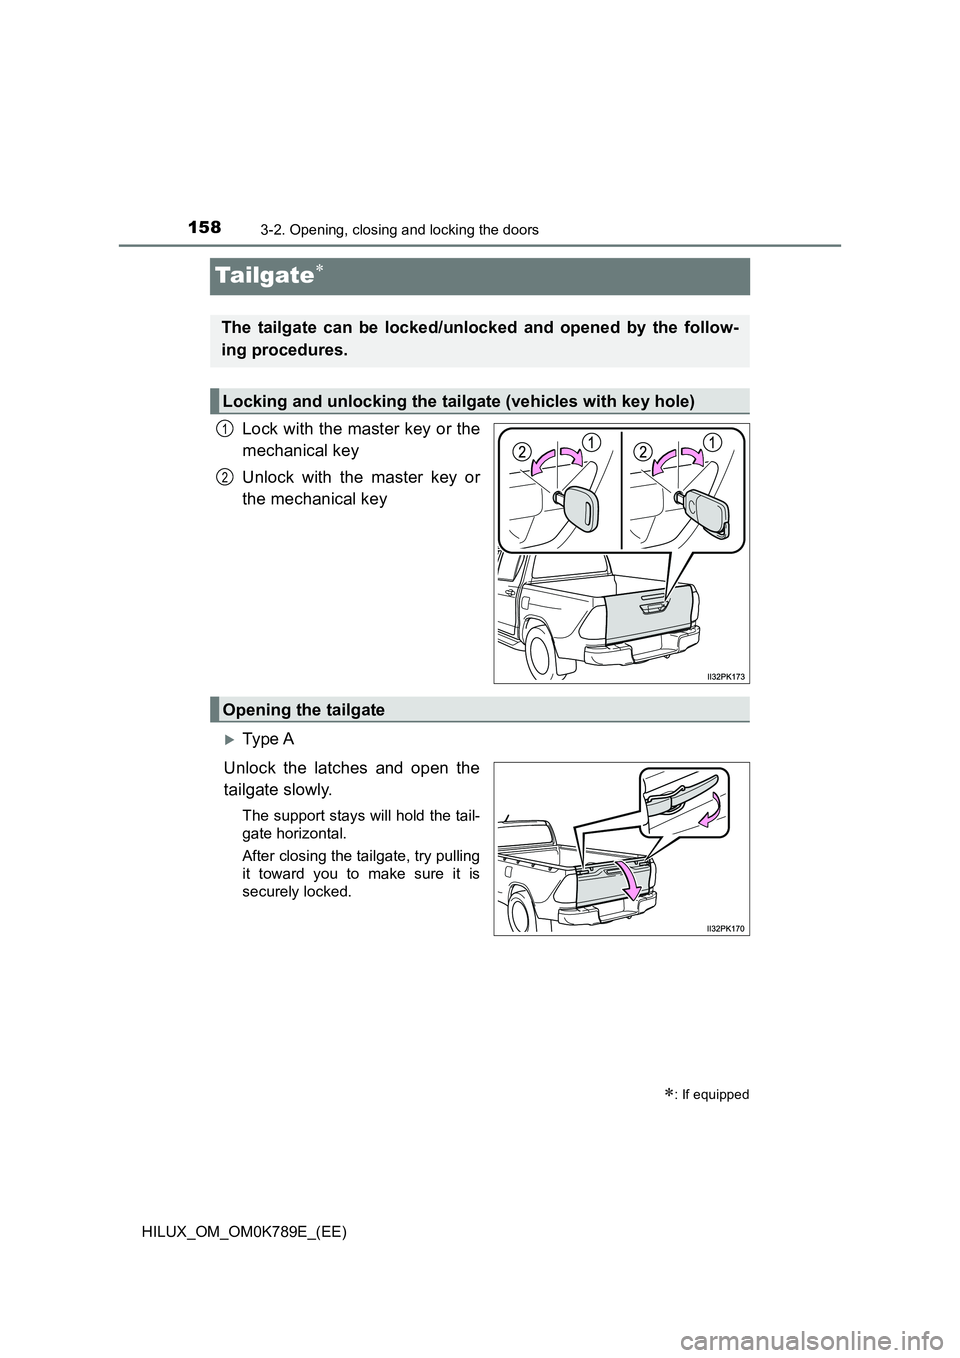 TOYOTA HILUX 2023  Owners Manual 1583-2. Opening, closing and locking the doors
HILUX_OM_OM0K789E_(EE)
Ta i lg at e
Lock with the master key or the 
mechanical key 
Unlock with the master key or 
the mechanical key
Ty pe  A 
Un